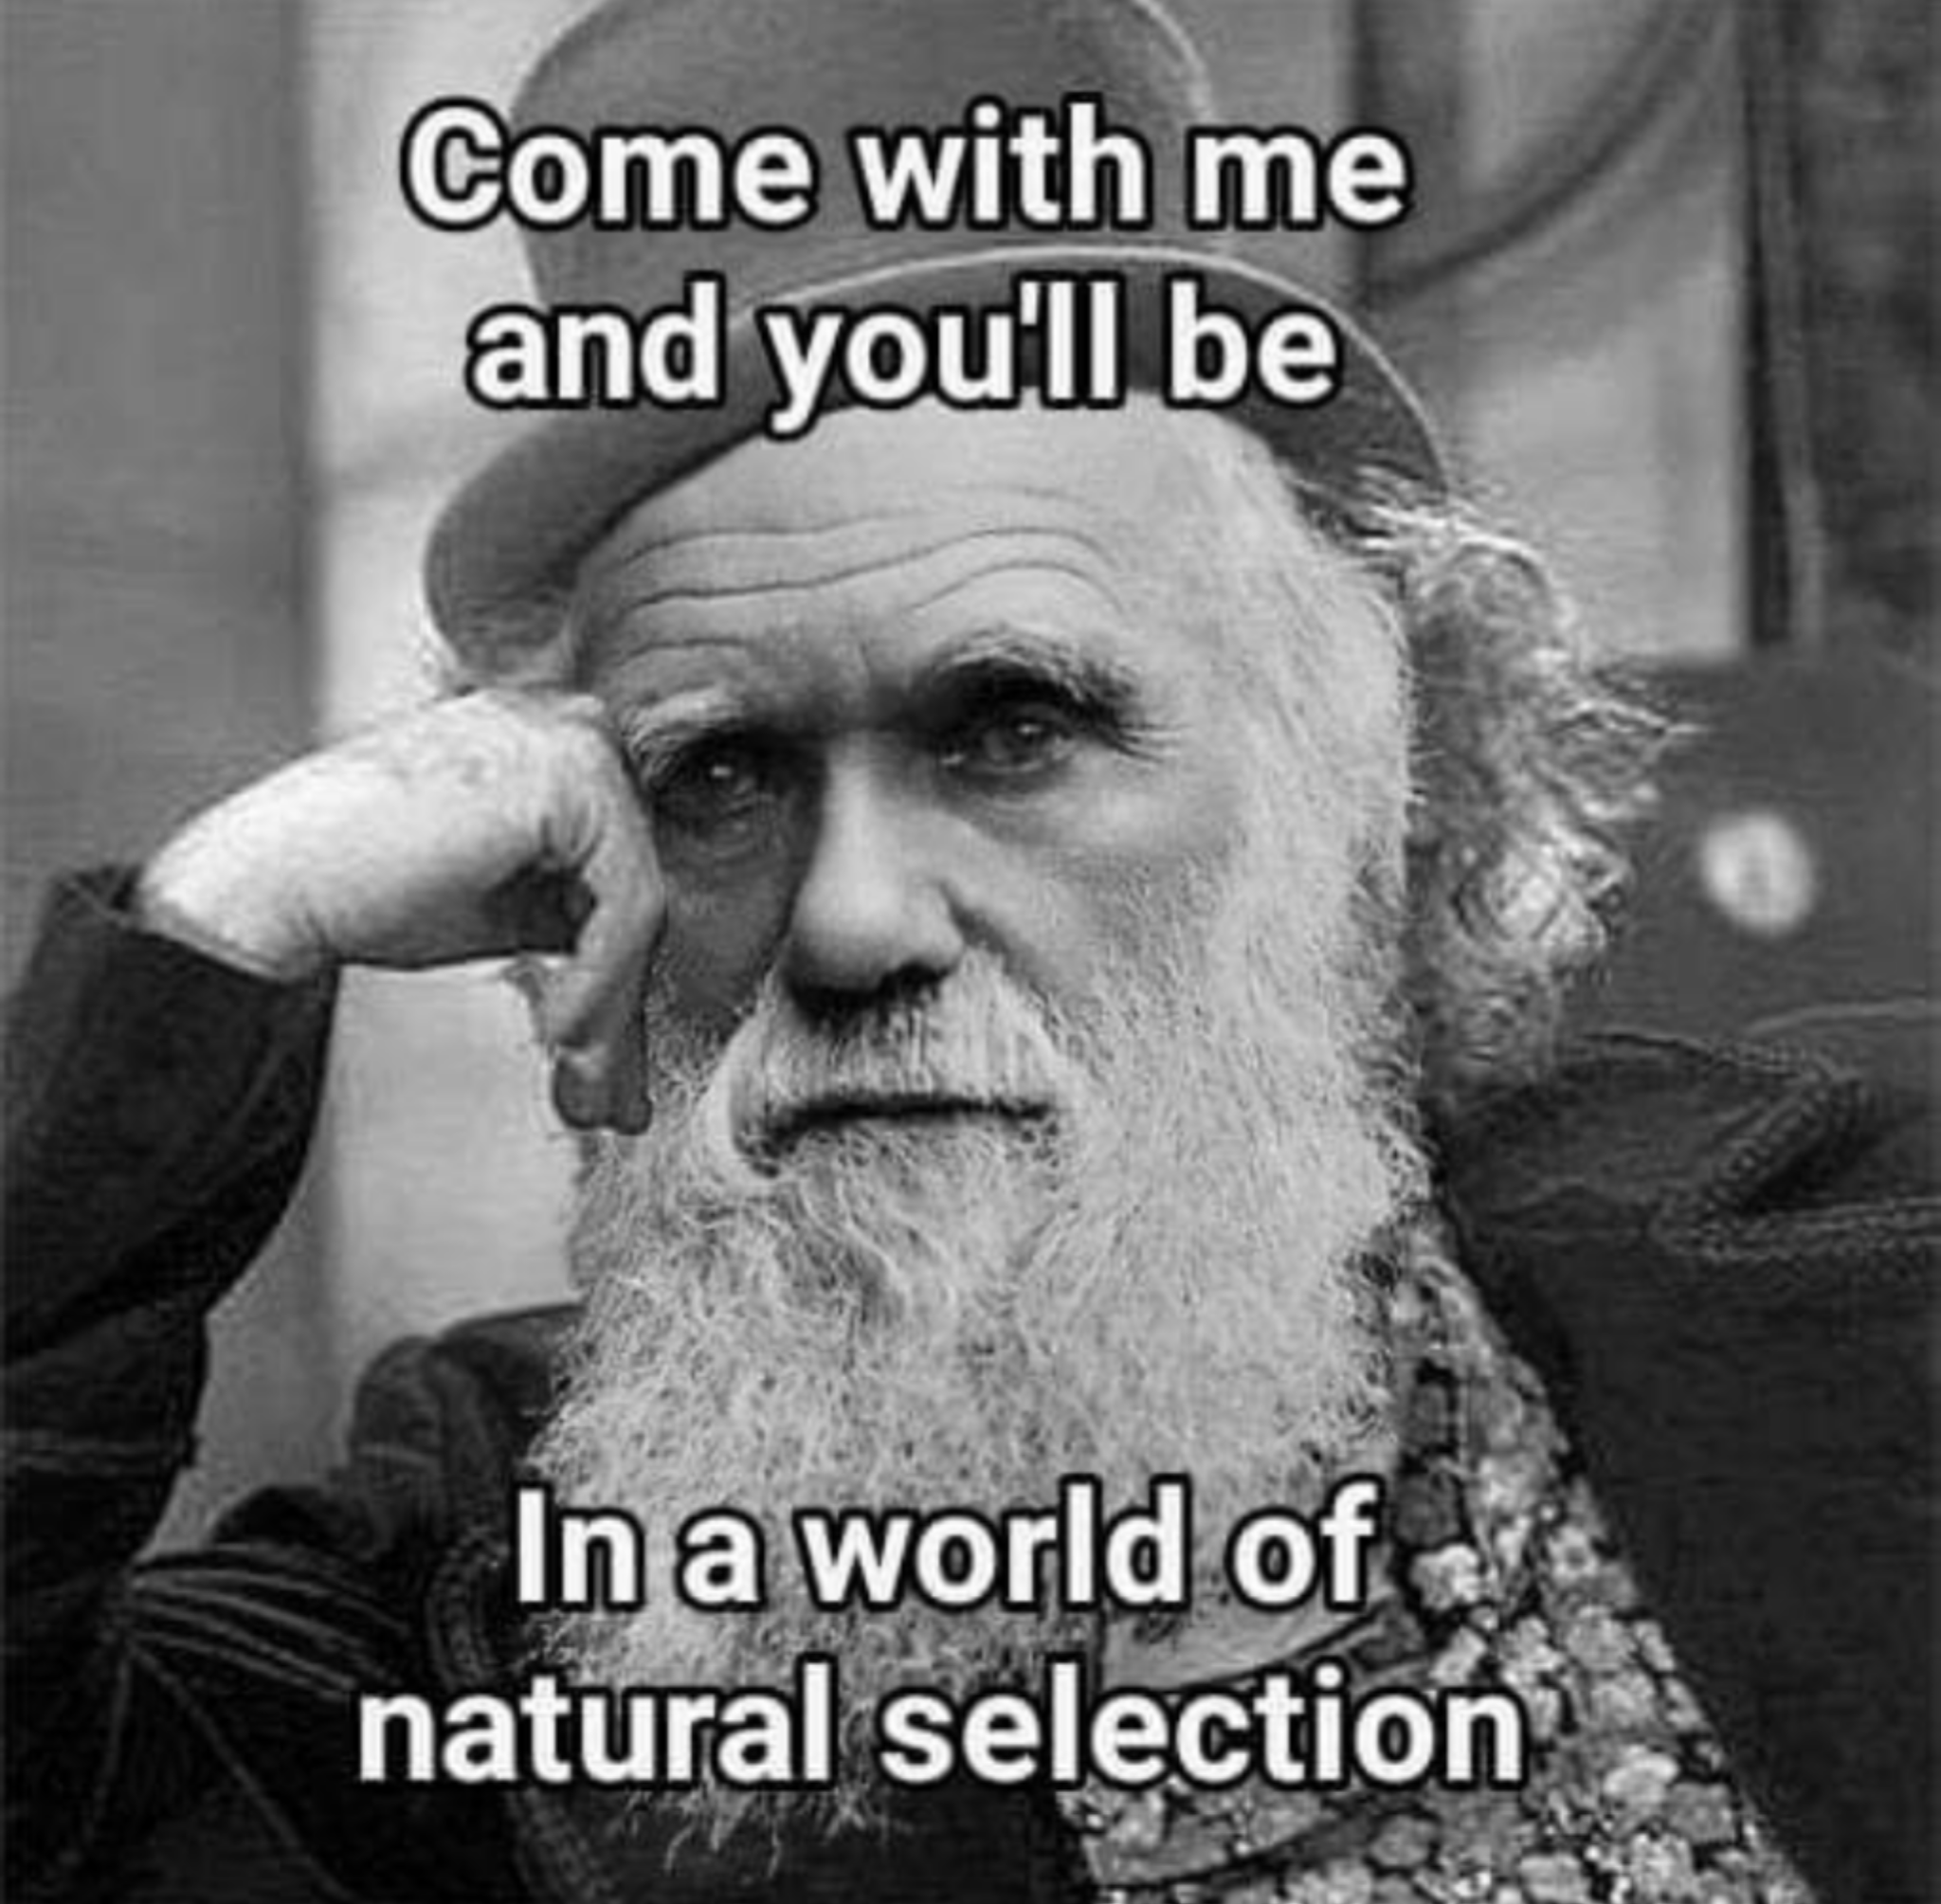 willy wonka meme - Come with me and you'll be In a world of natural selection